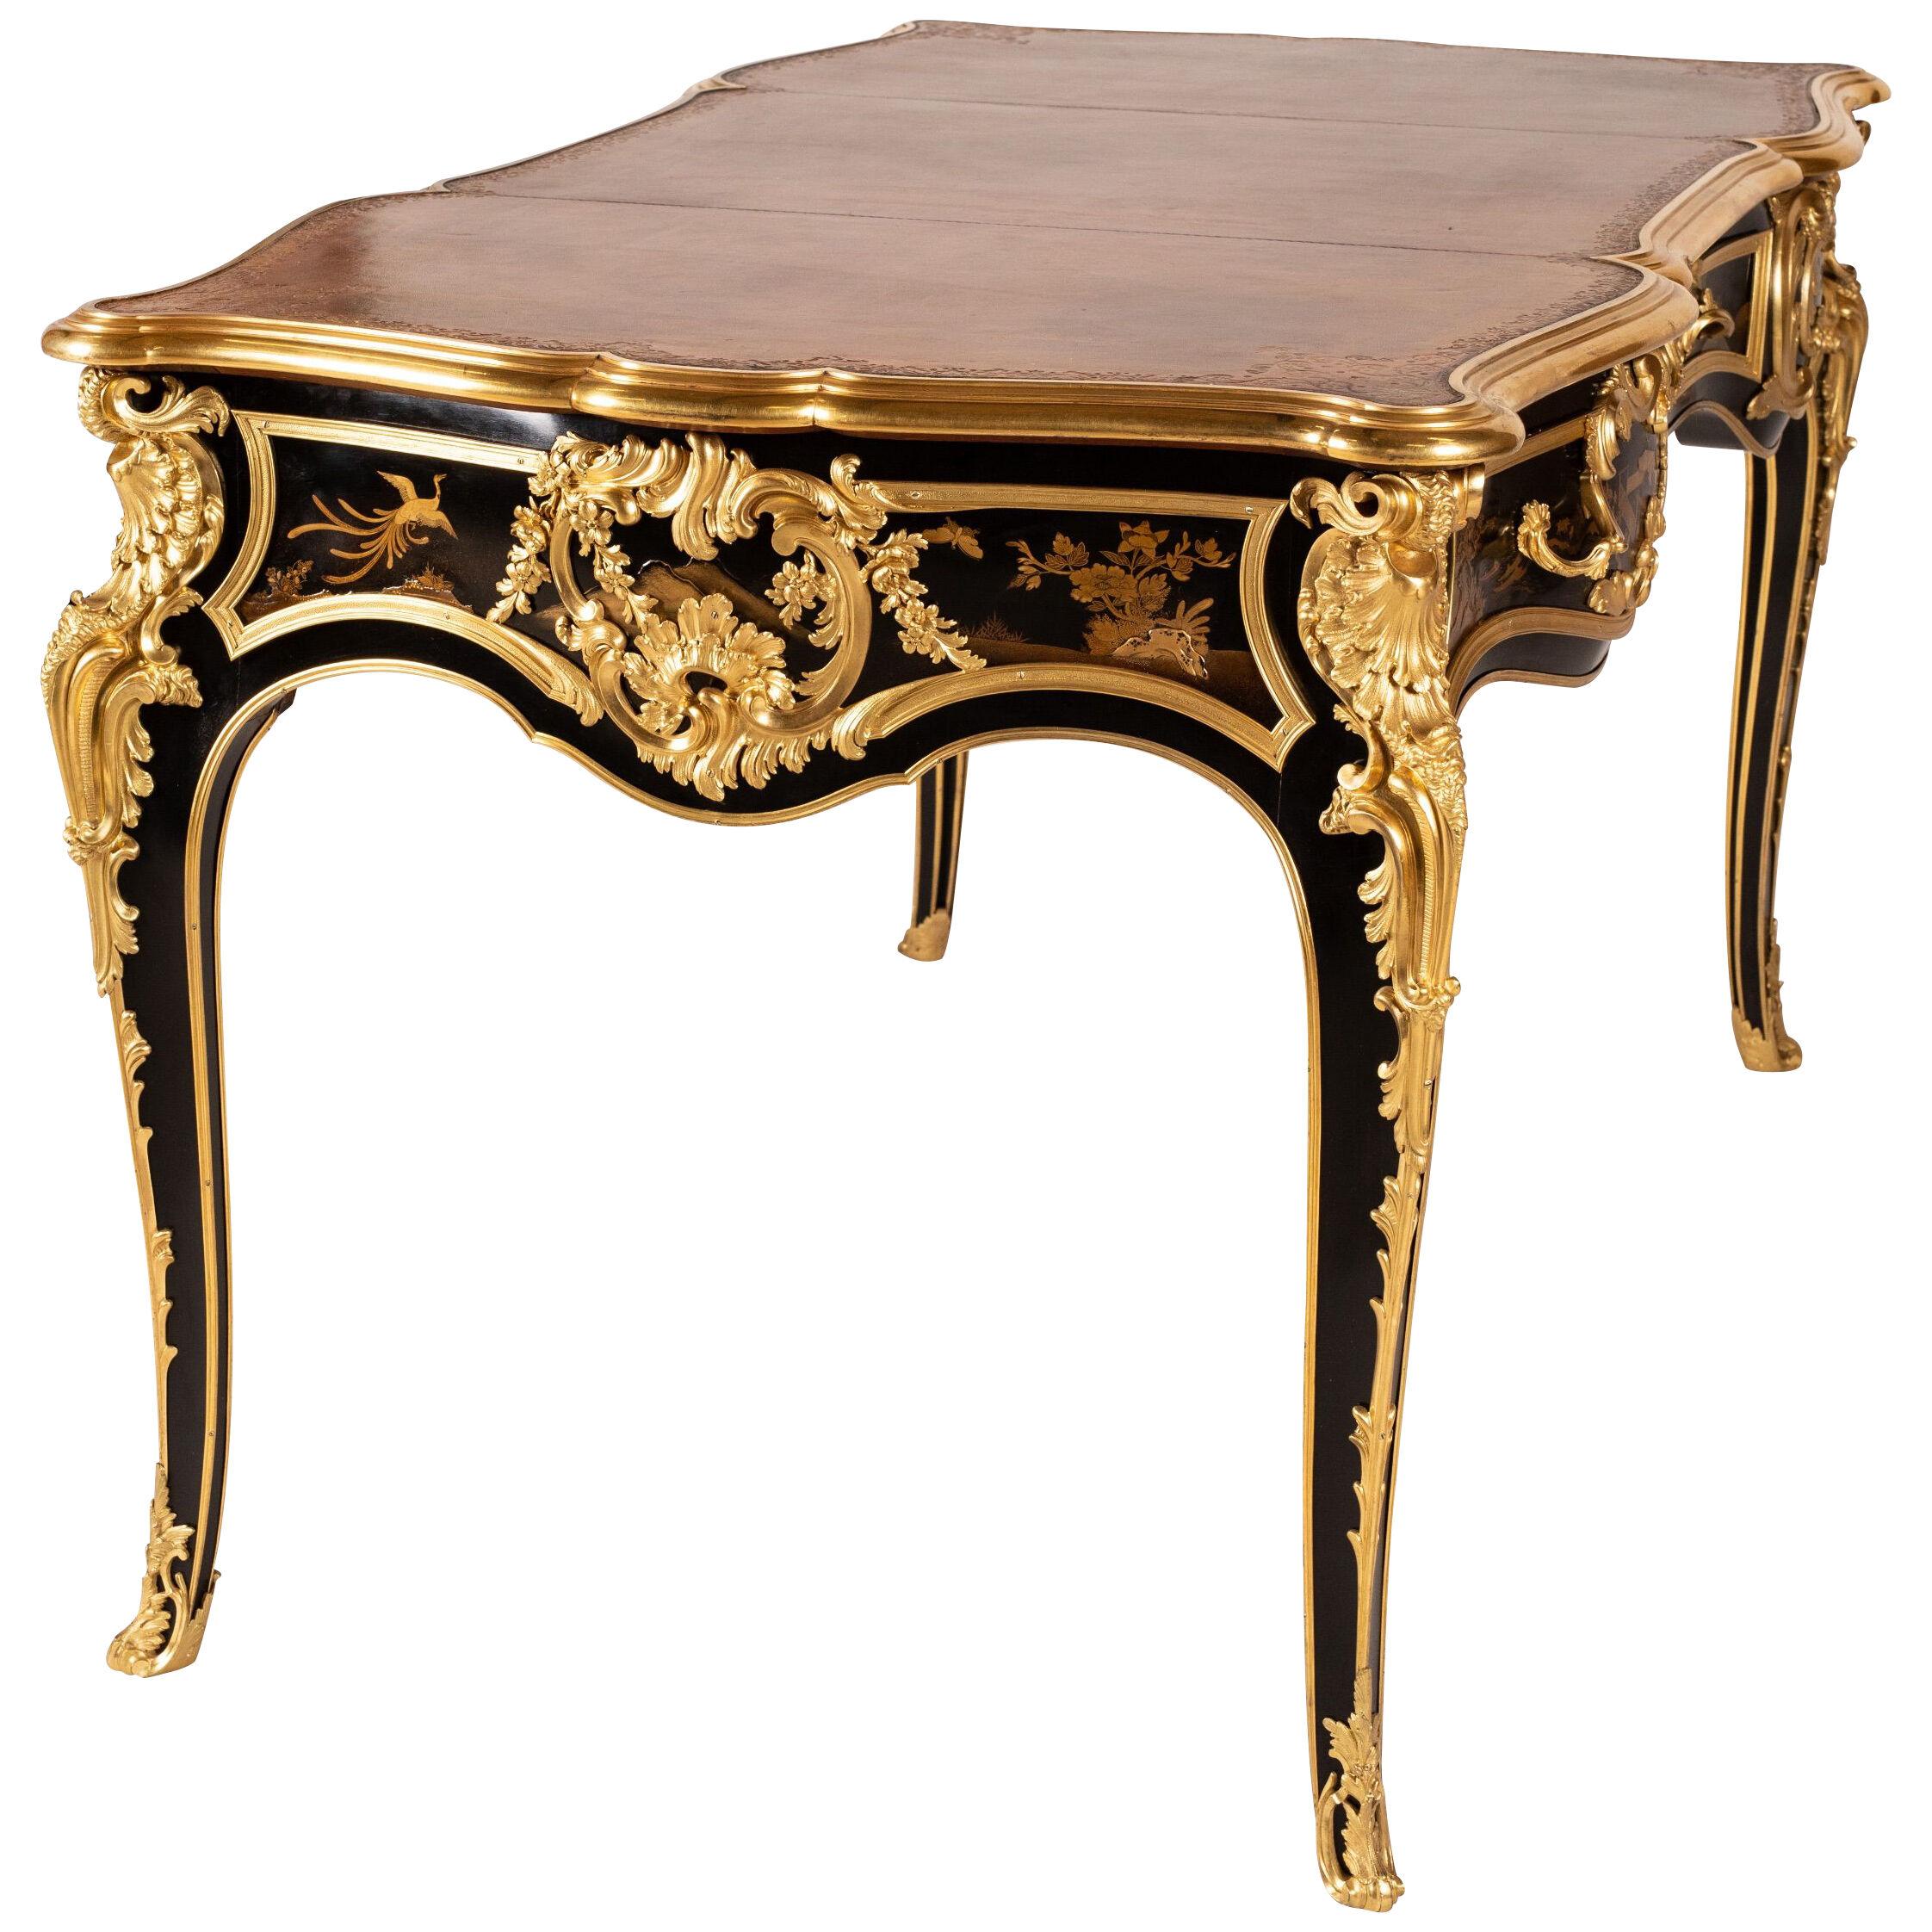 Exceptional Lacquer Bureau Plat in the Louis XV Style